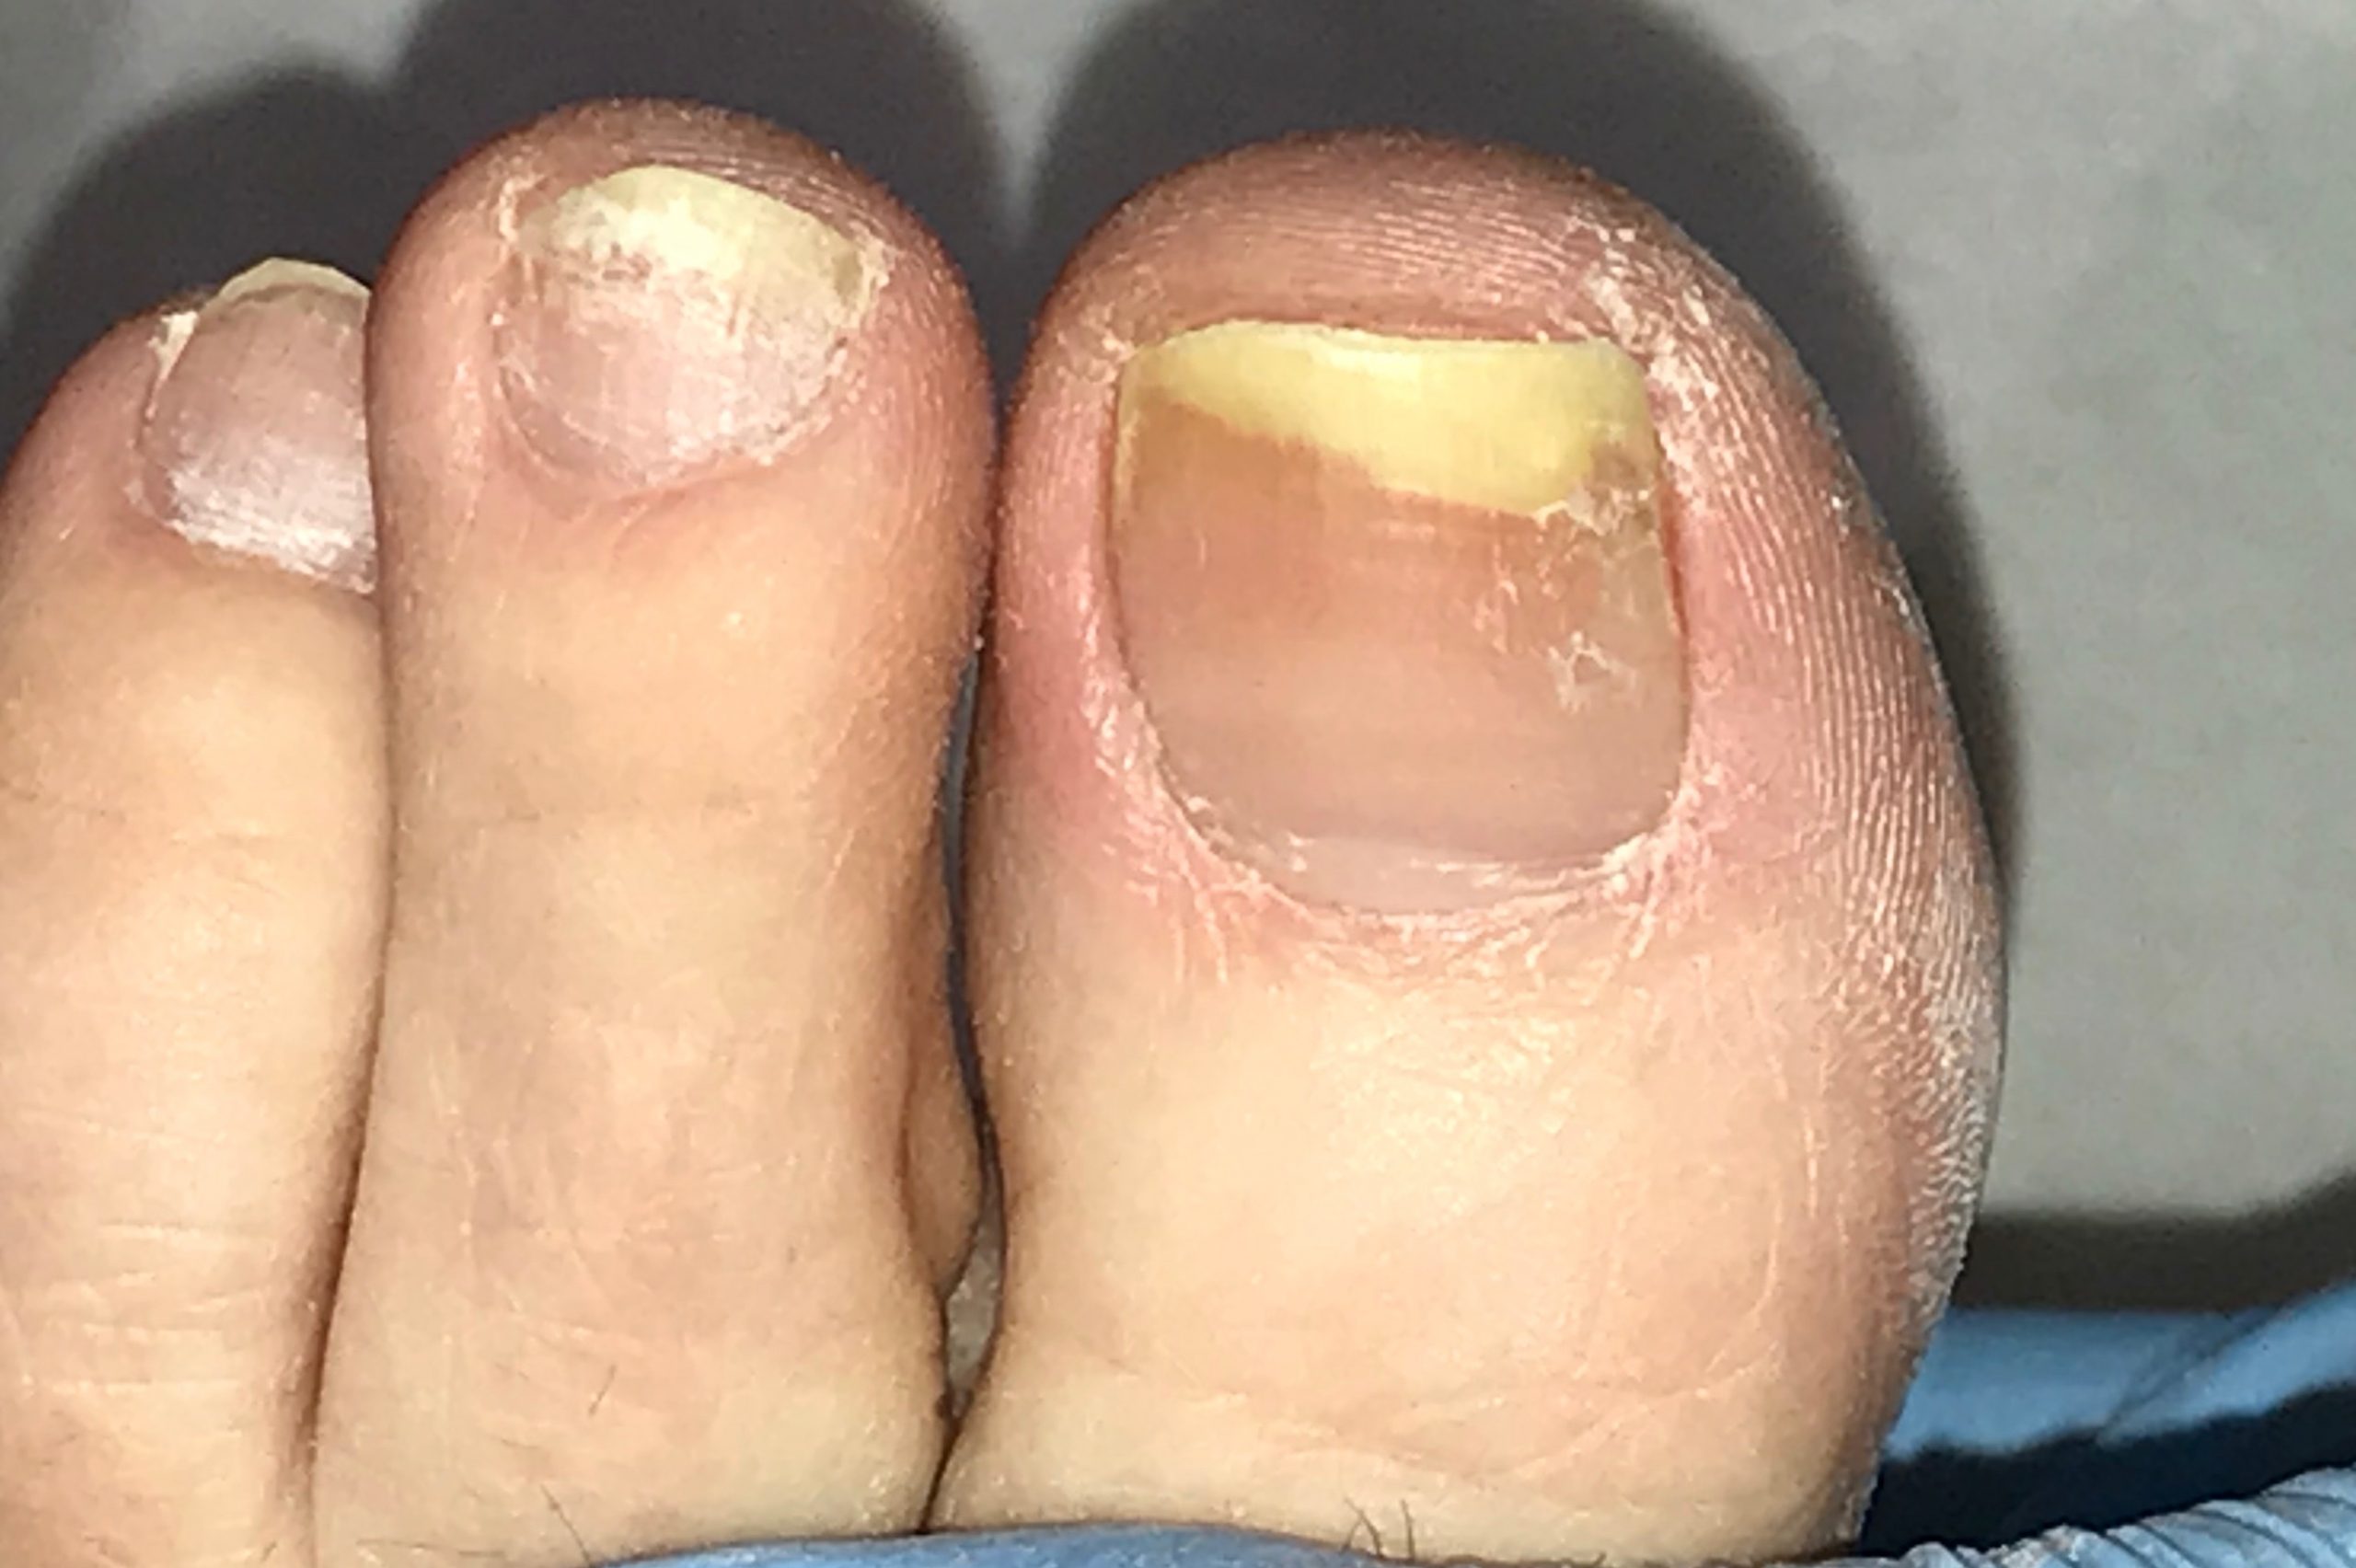 Try One of These 10 Home Remedies for Toenail Fungus